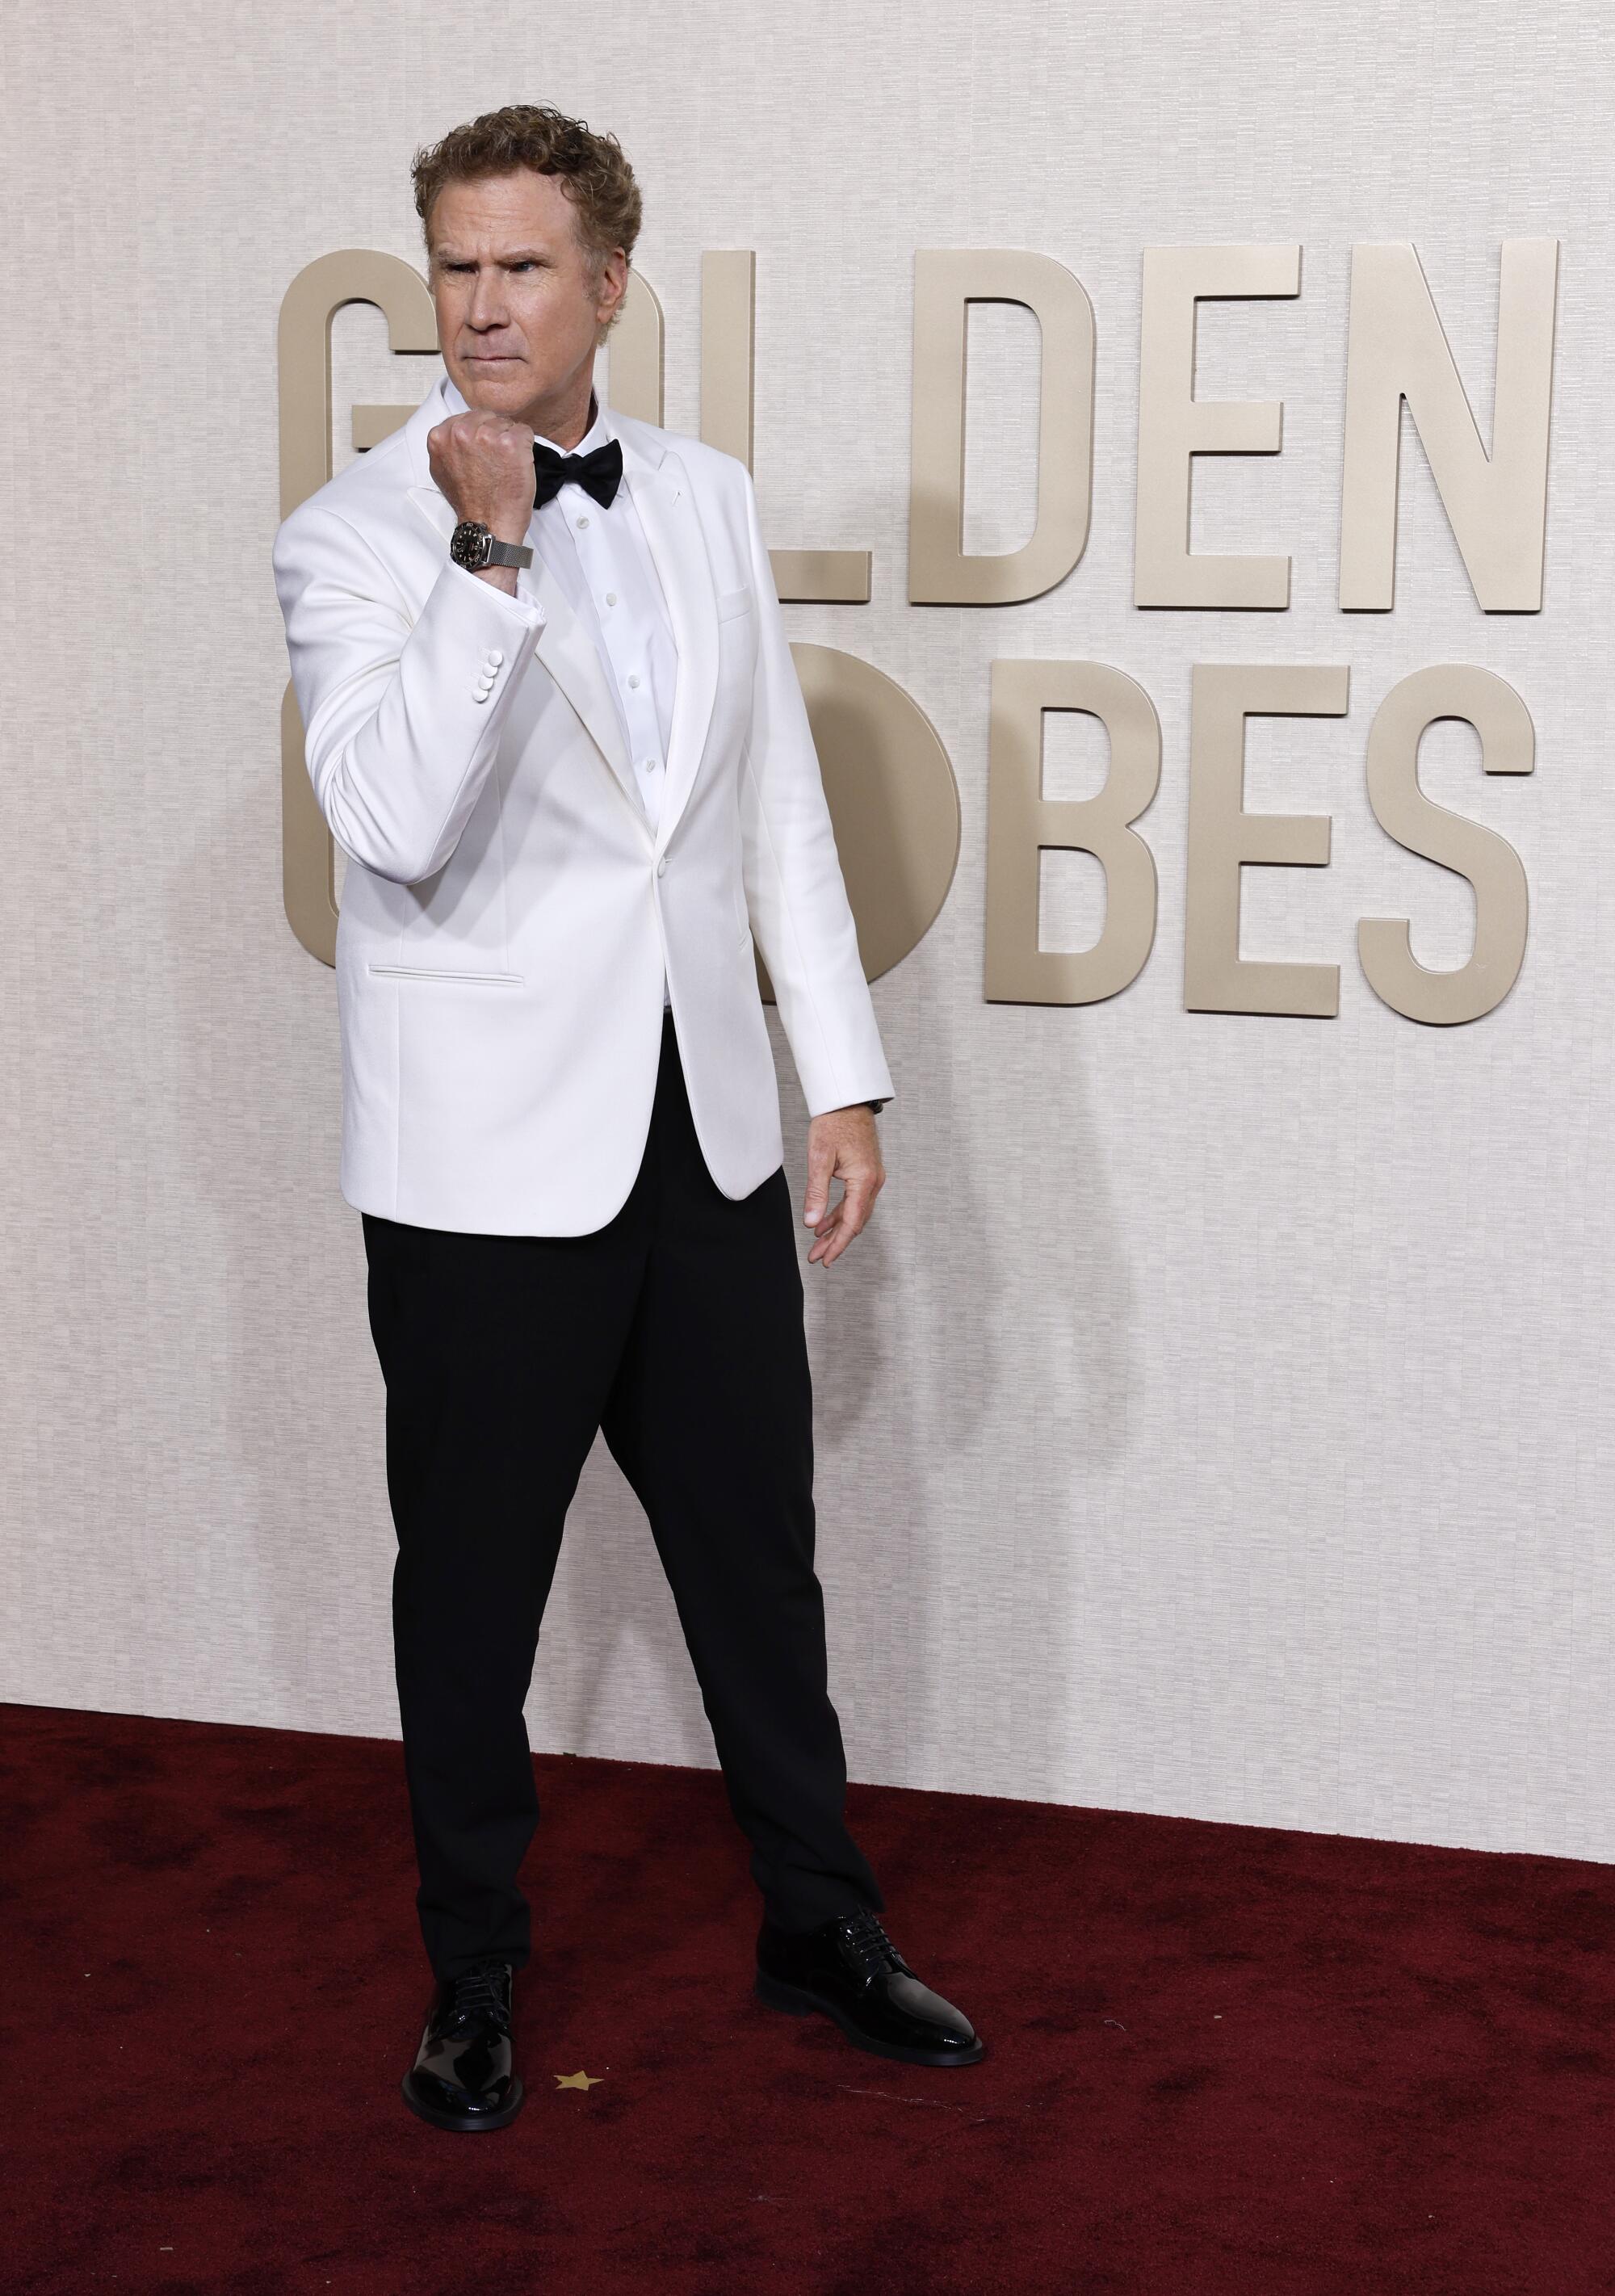 Will Ferrell on the red carpet of the 81st Annual Golden Globe Awards held at the Beverly Hilton Hotel on January 7, 2024.